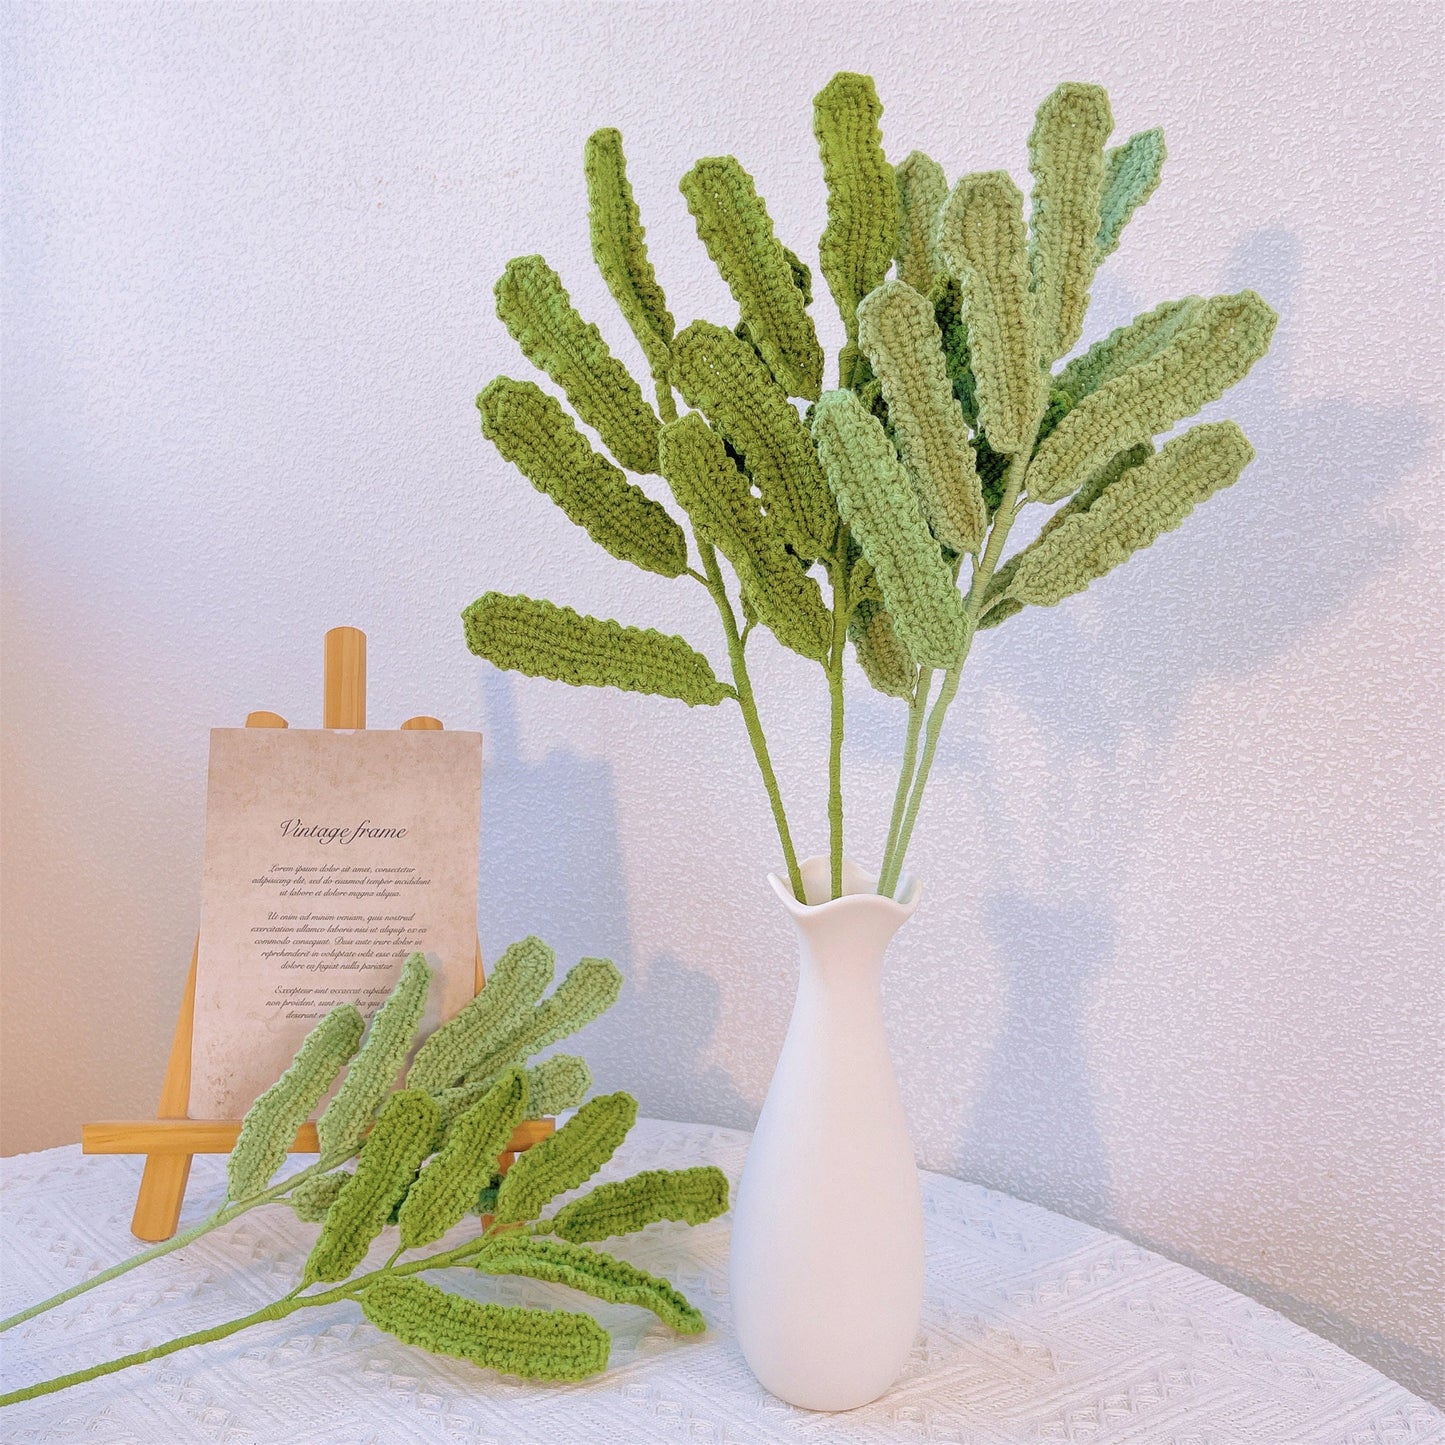 Handmade Crochet Daisy Leaves Delight Plant Stake for Home Decoration and DIY Plant Crafts - Centerpiece, Workspace, Flower Arrangement